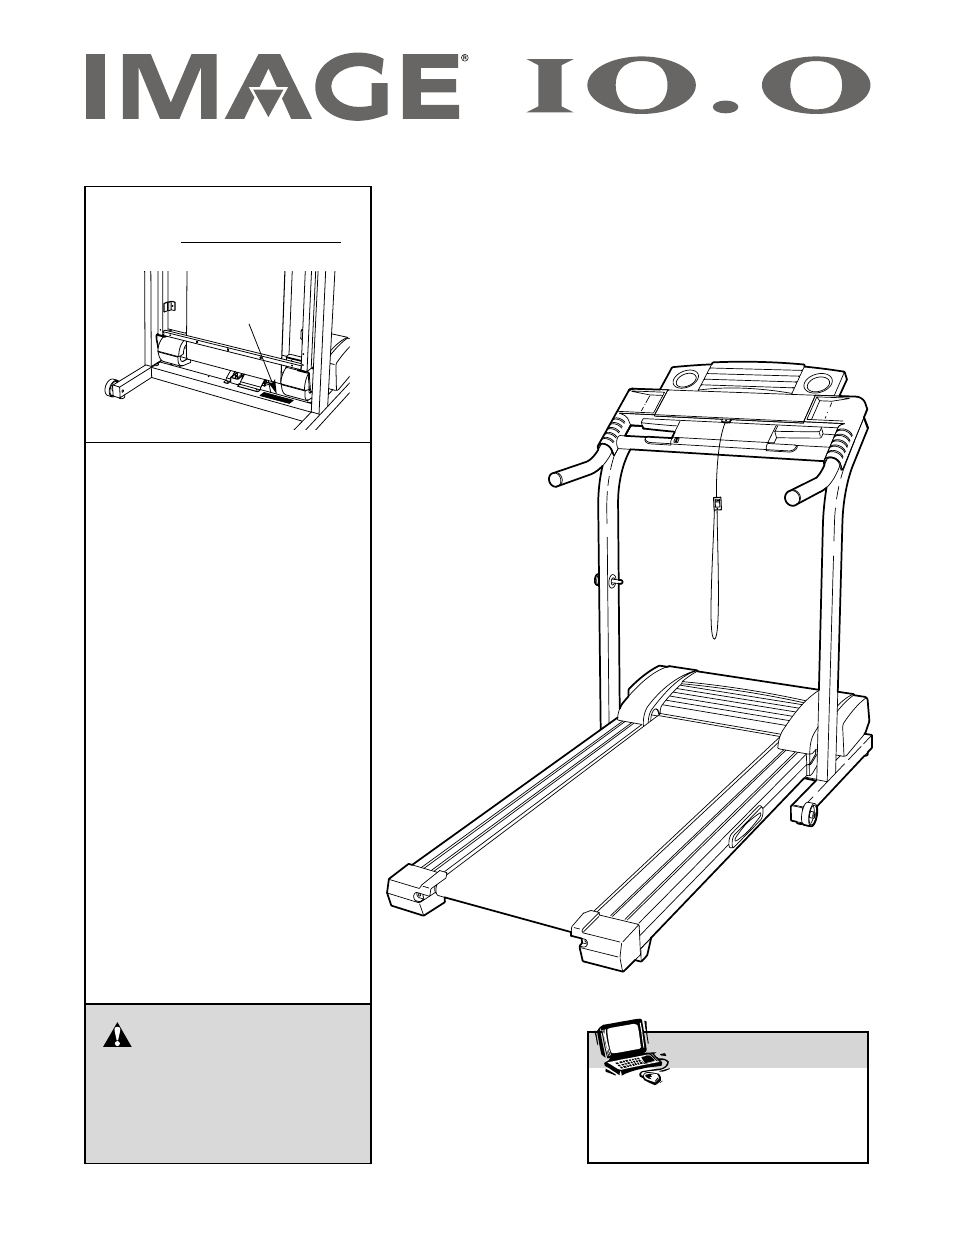 image-10-0-treadmill-imtl39620-user-manual-30-pages